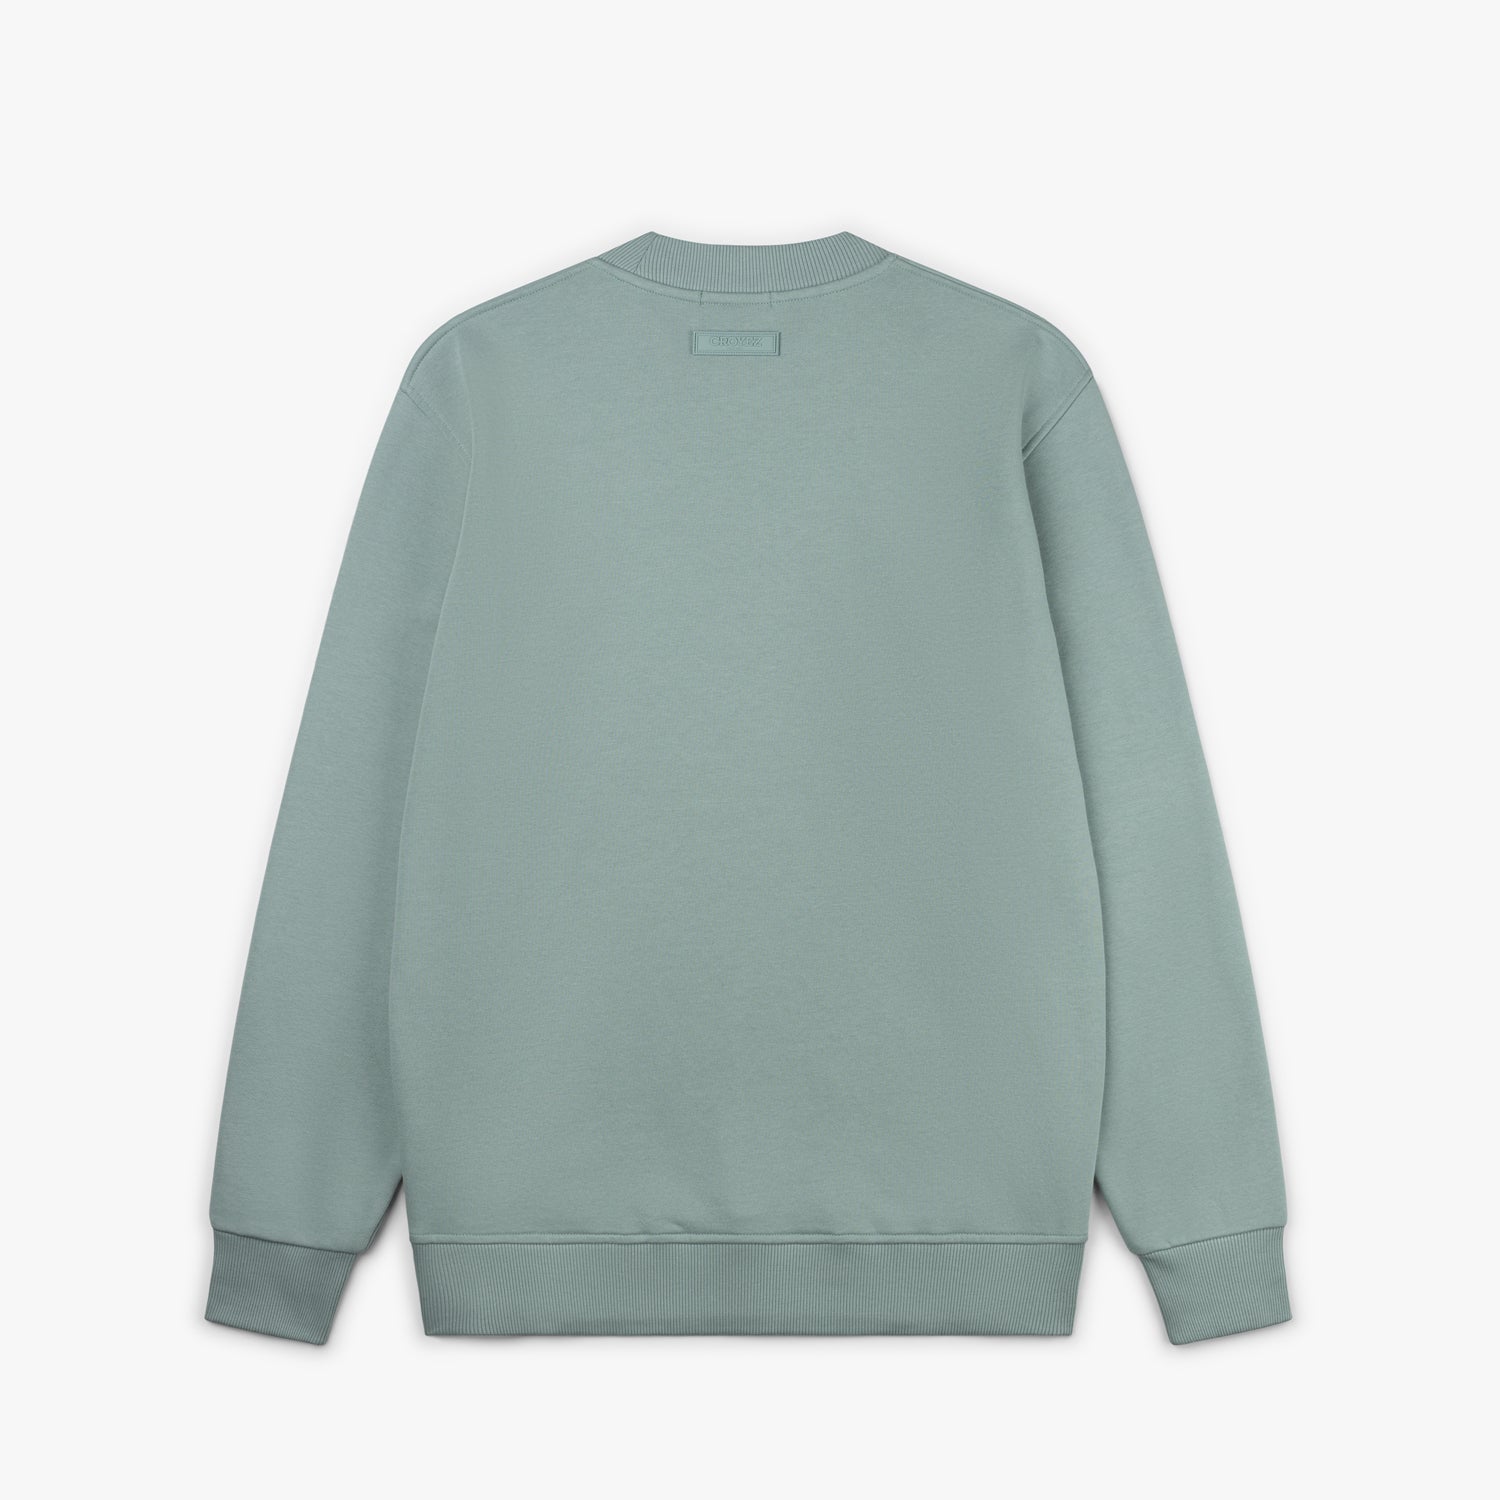 CROYEZ ABSTRACT SWEATER - BLUE SURF